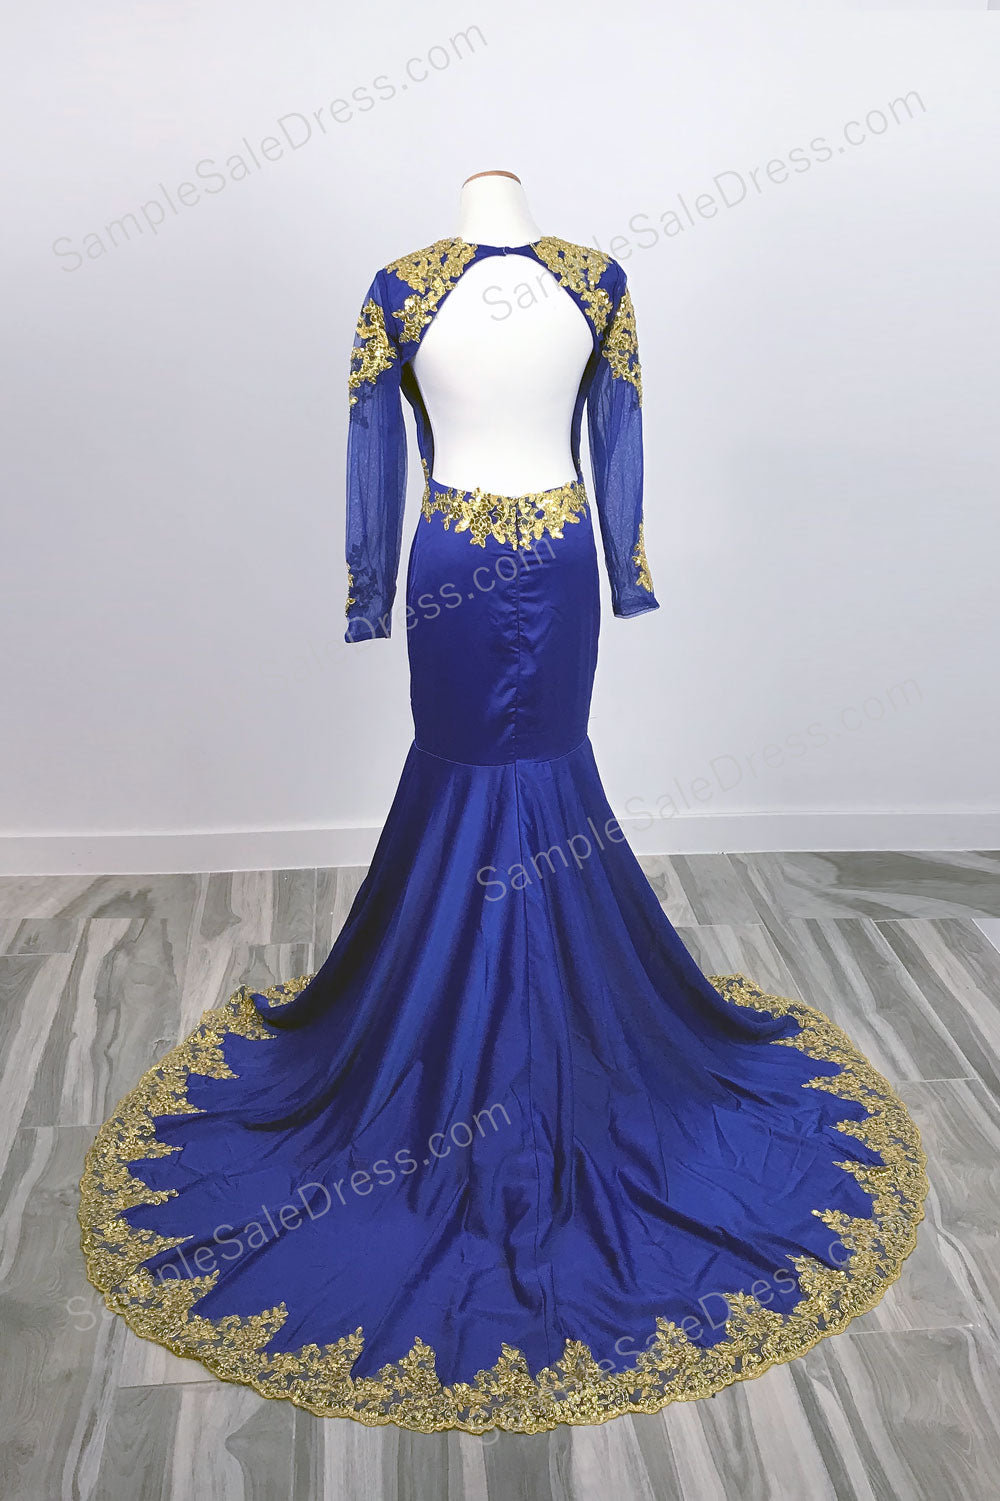 Royal Blue Gold Quinceanera Dresses | Navy Blue Gold Quinceanera Dresses -  Shoulder - Aliexpress